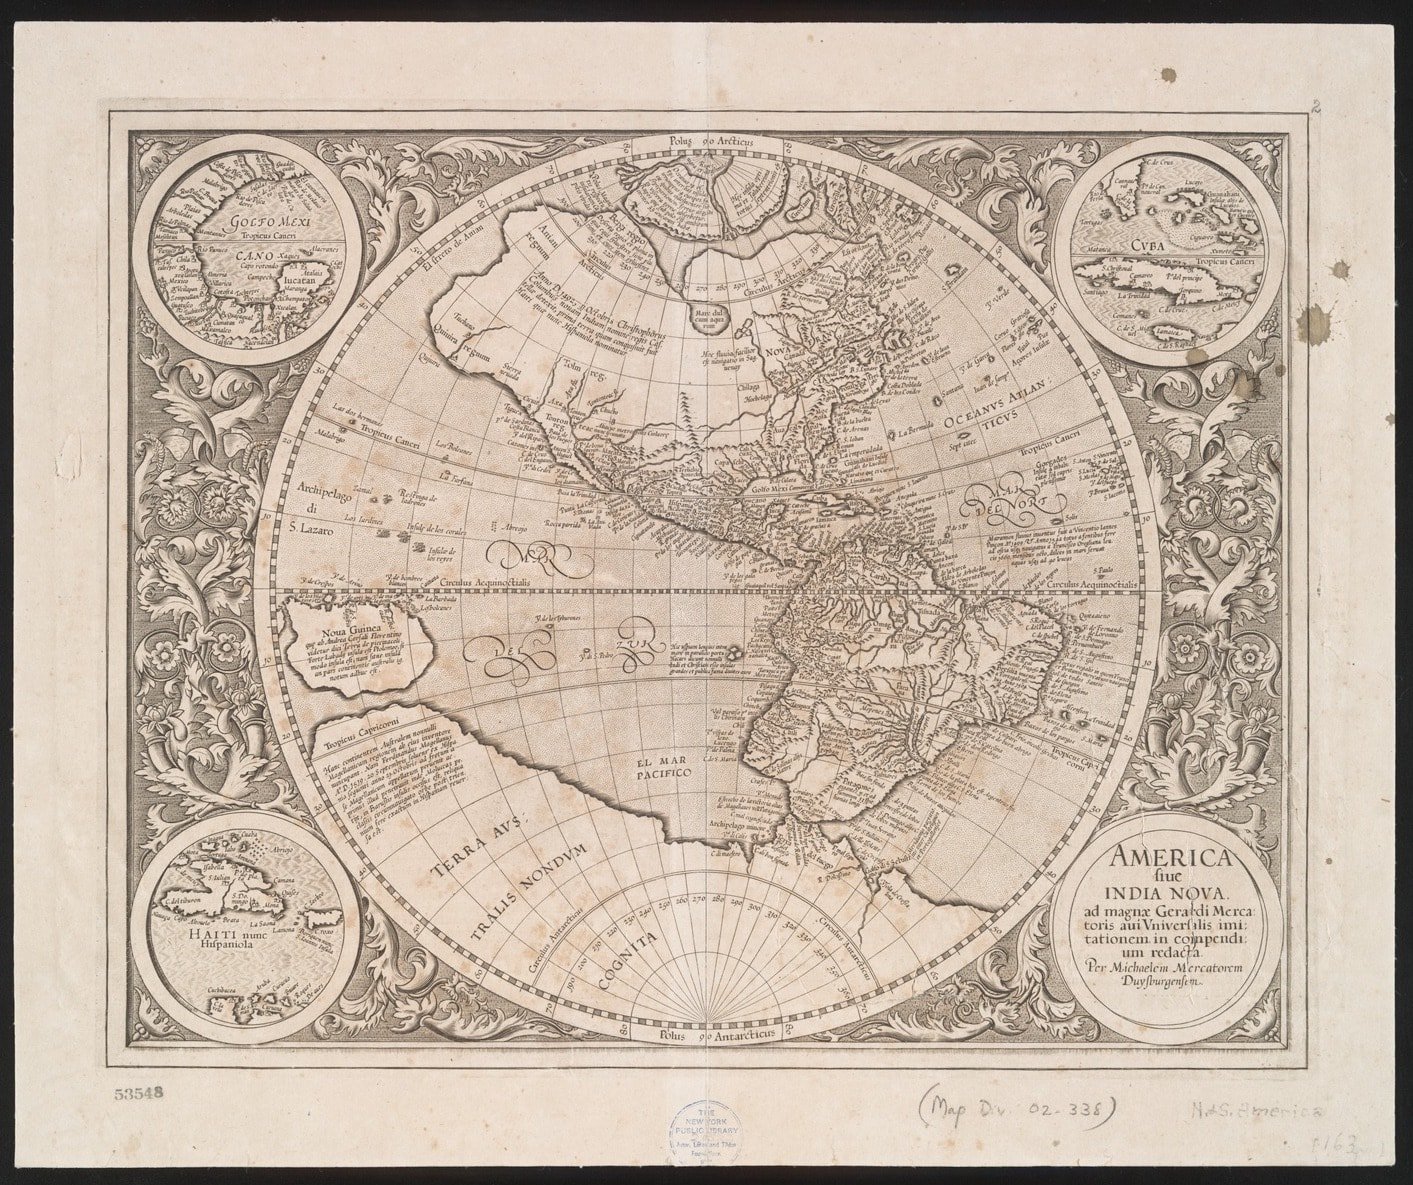 1633 map of the Americas